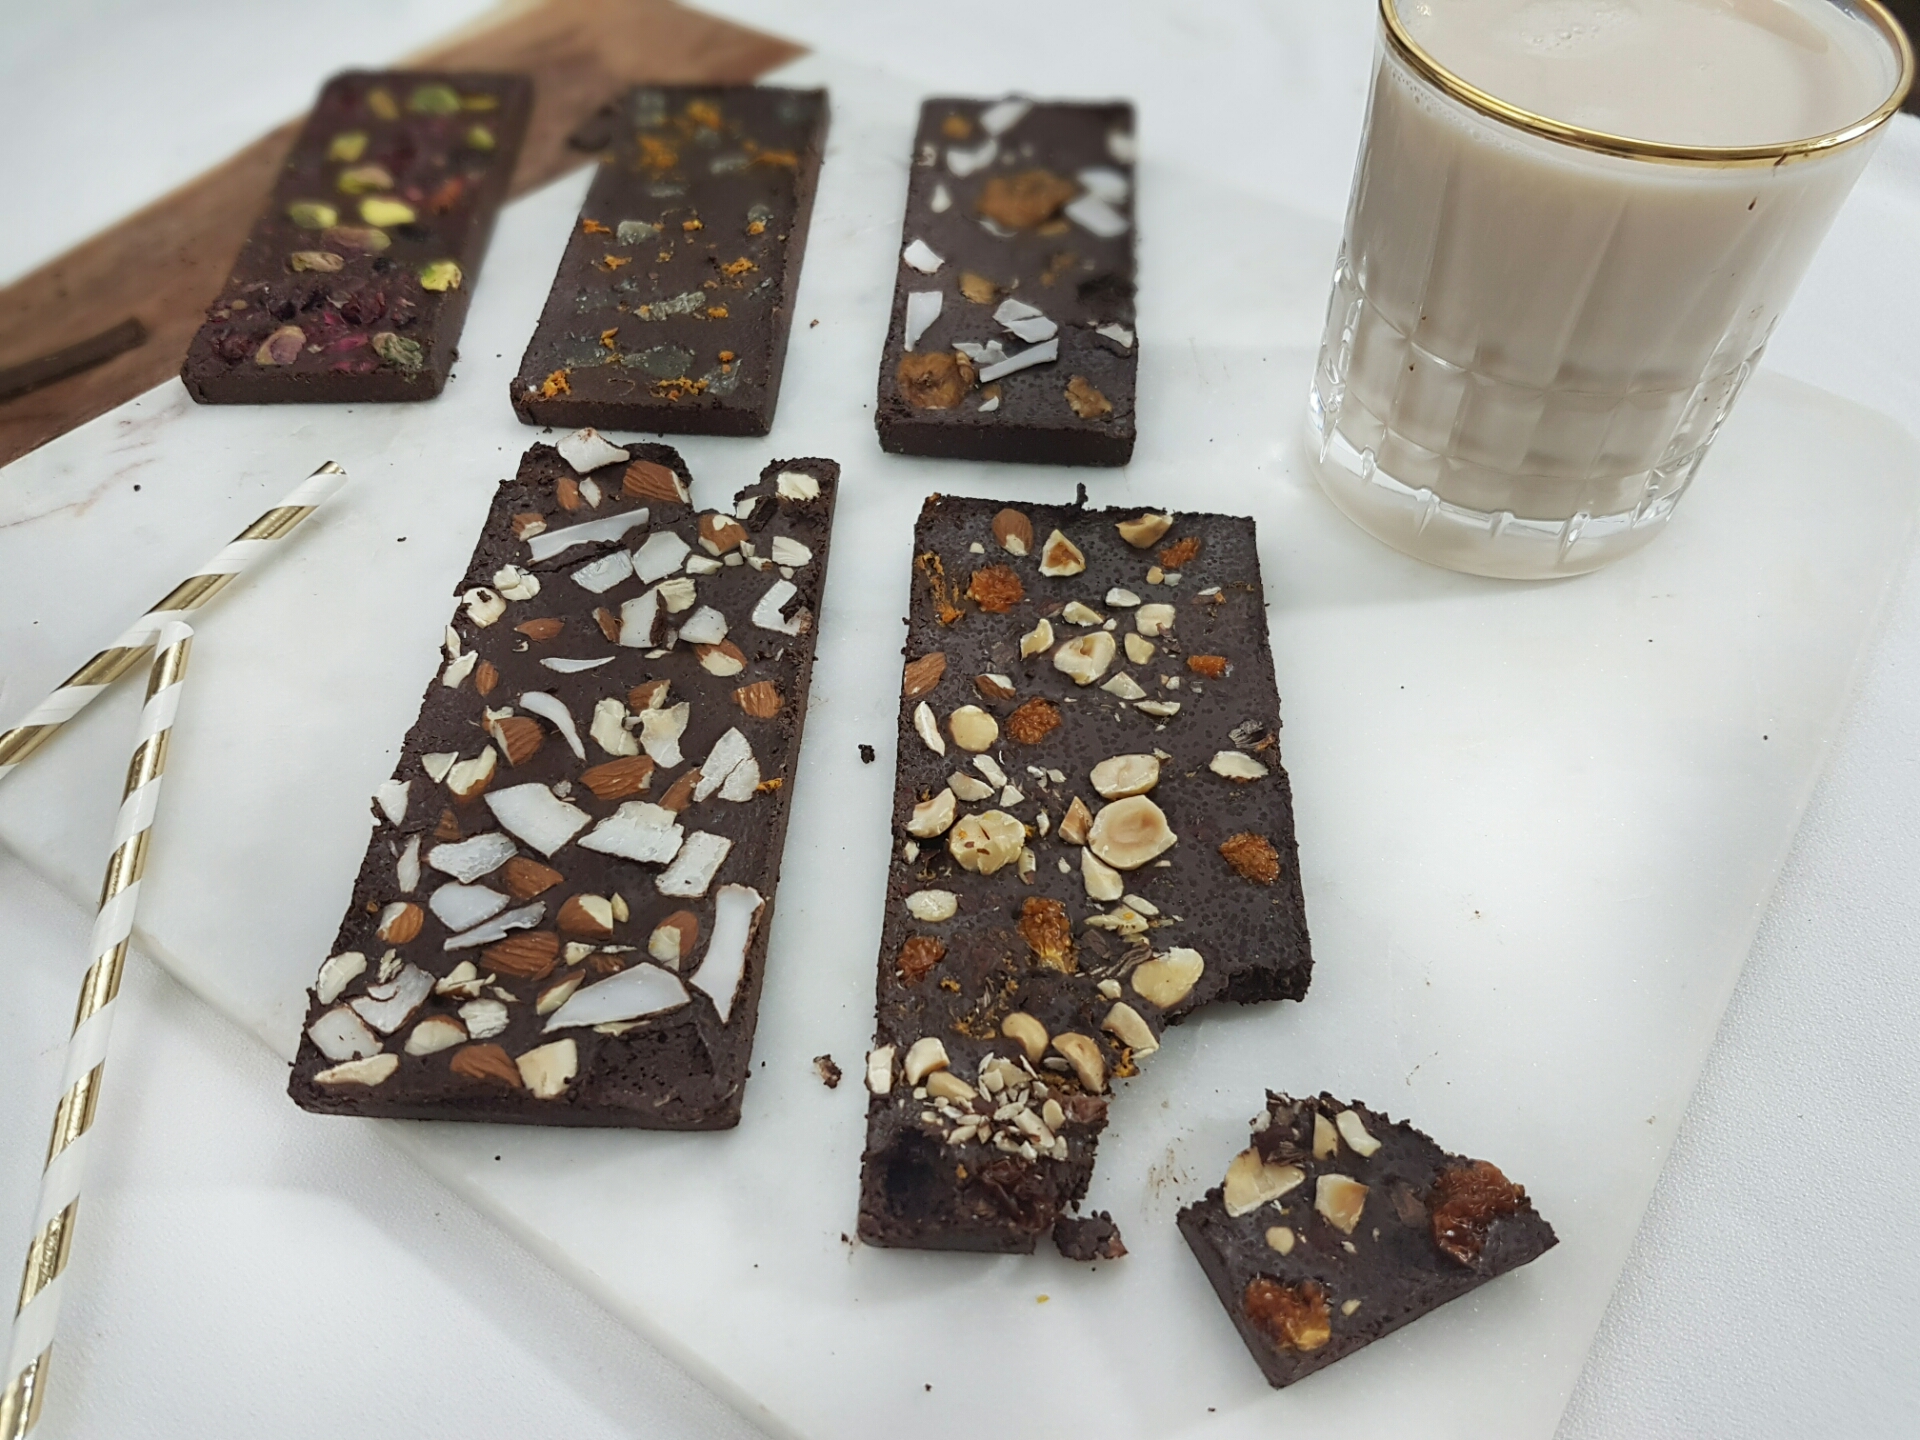 DIY Fruit, Nut And Flower-Laced Chocolate Bars.